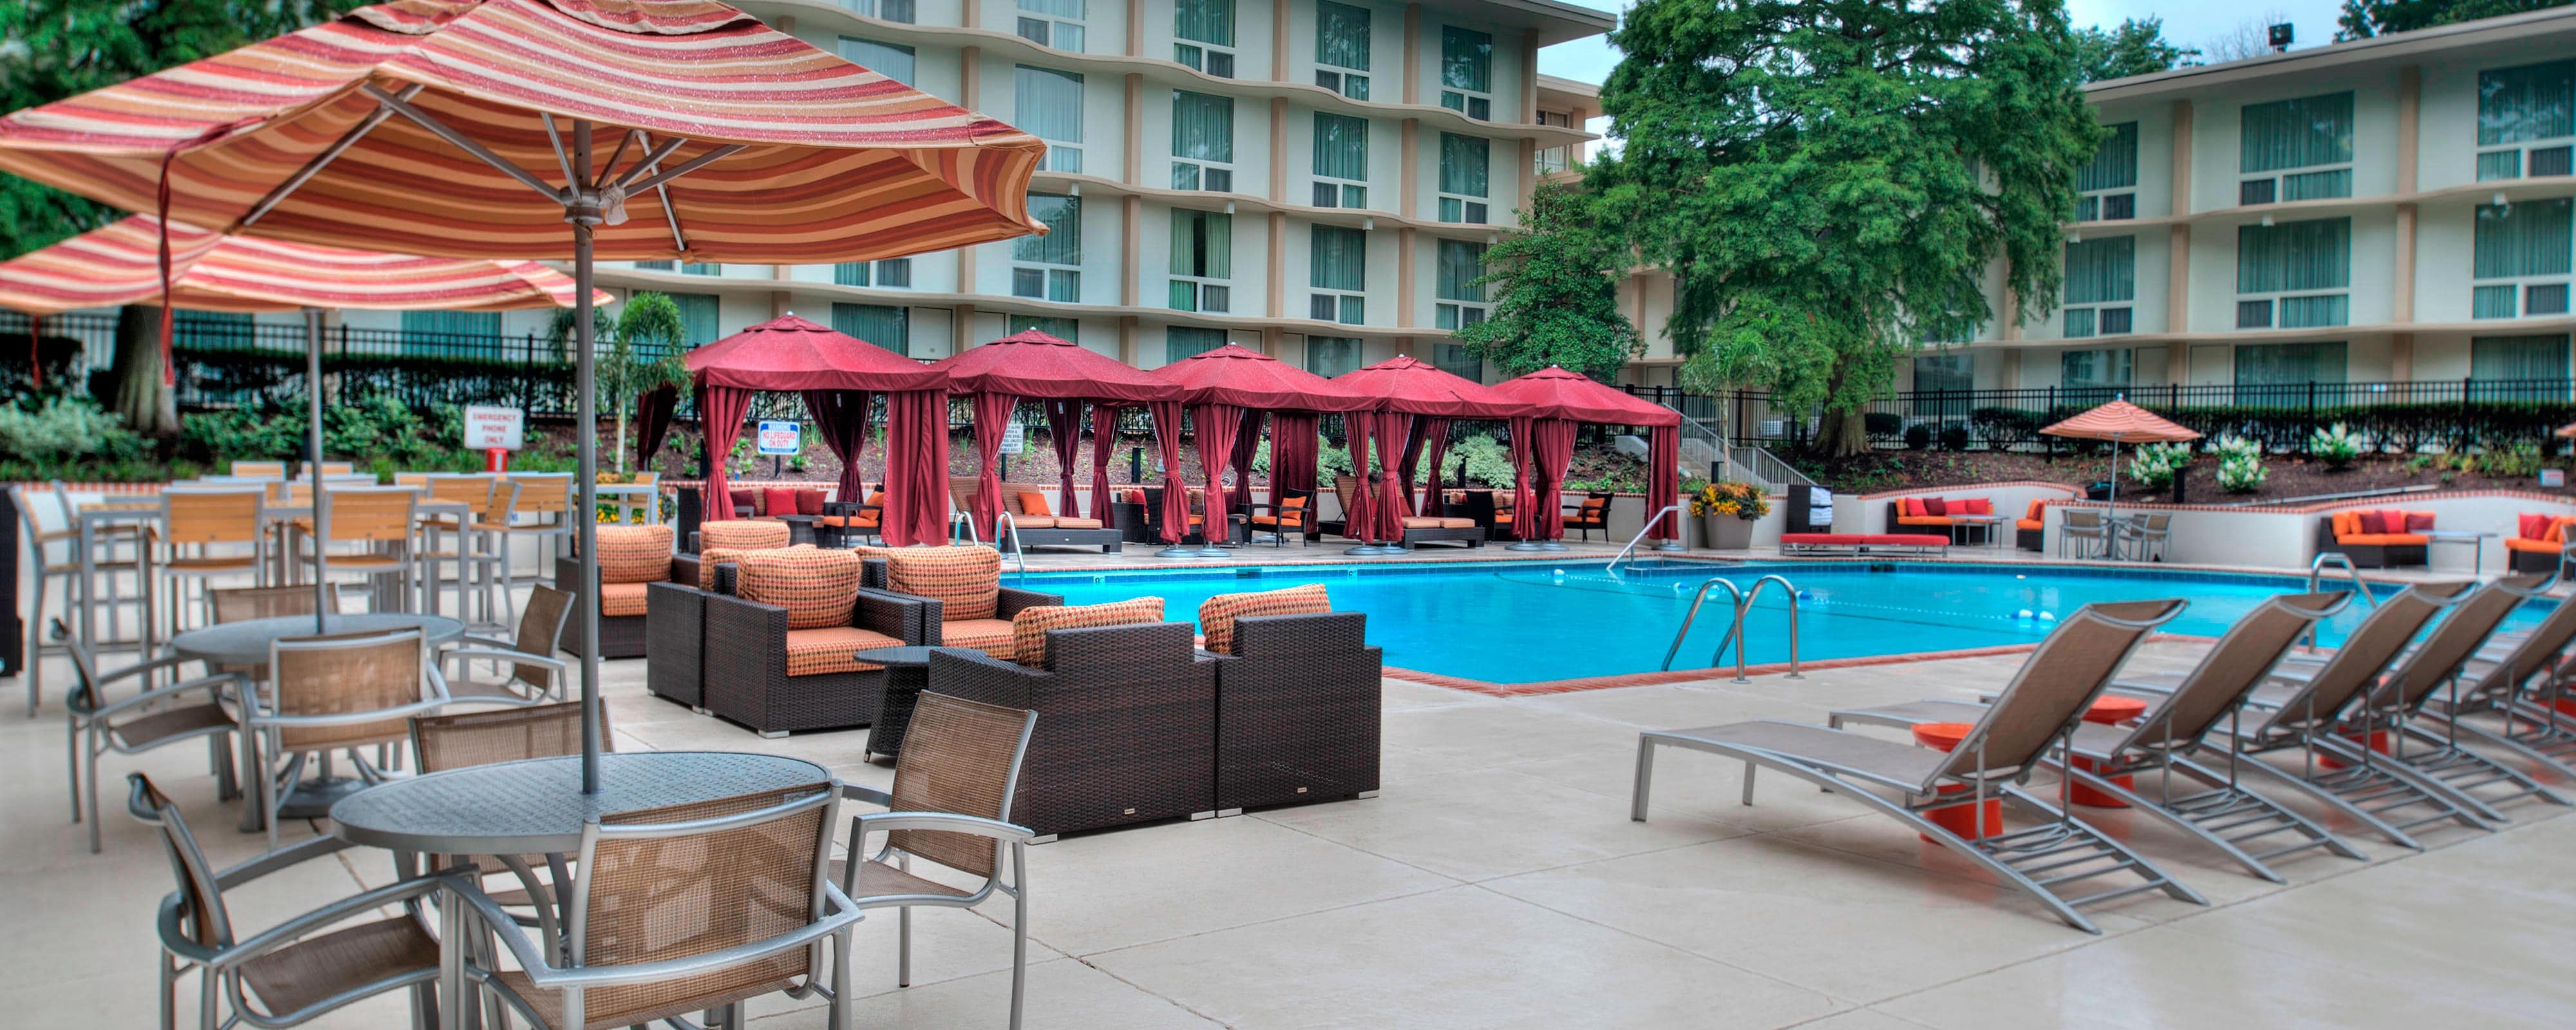 St. Louis Hotel Near the Zoo & the St. Louis Arch For St. Louis Family Vacations